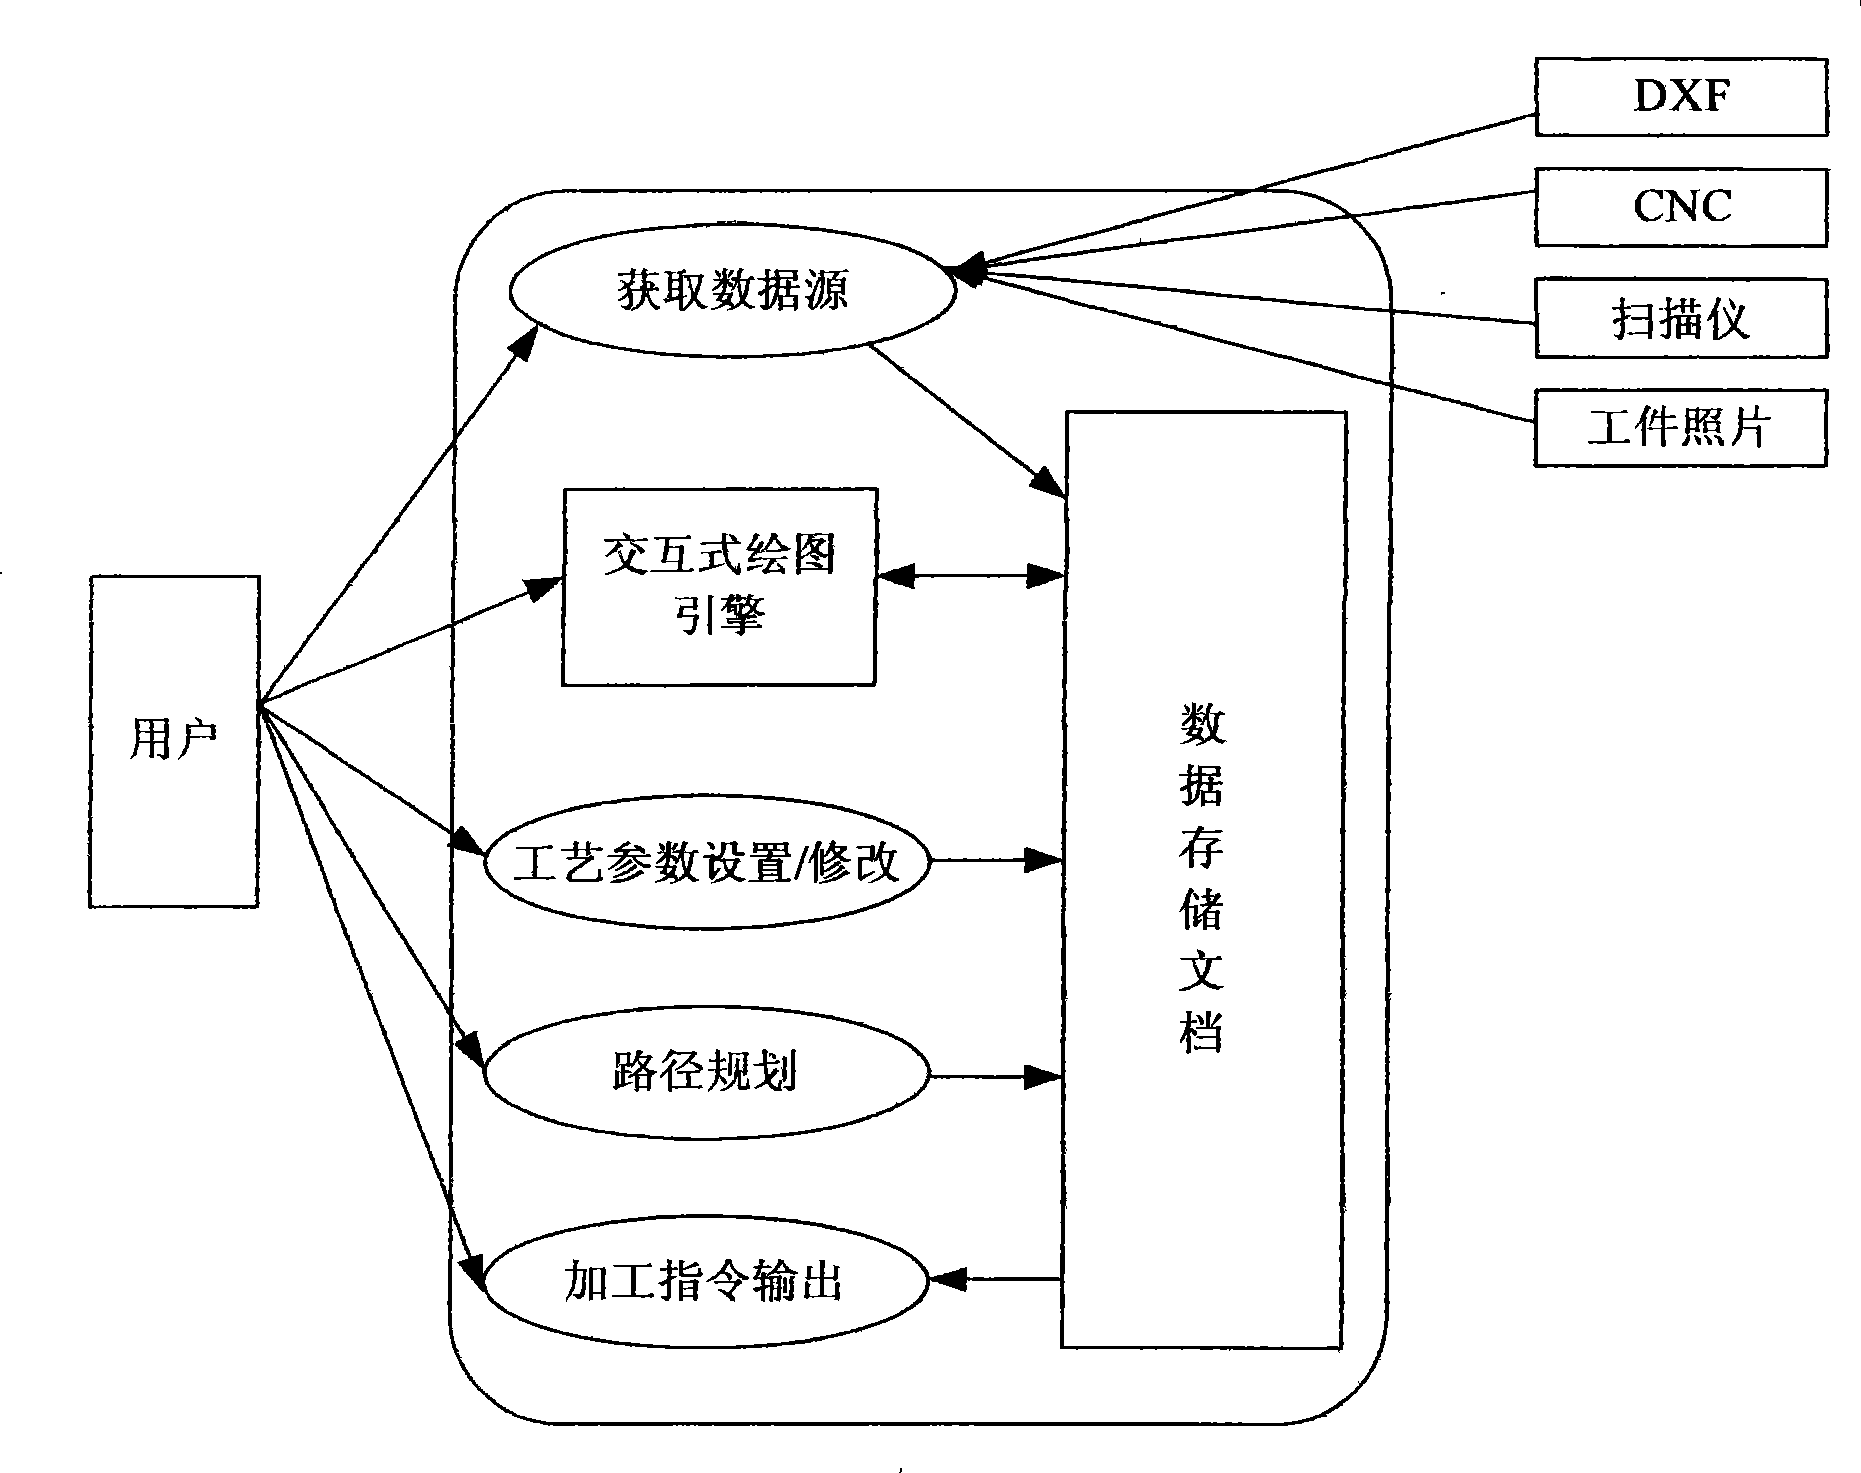 Automatic drip model method of microcomputer combining with digital control drip model machine